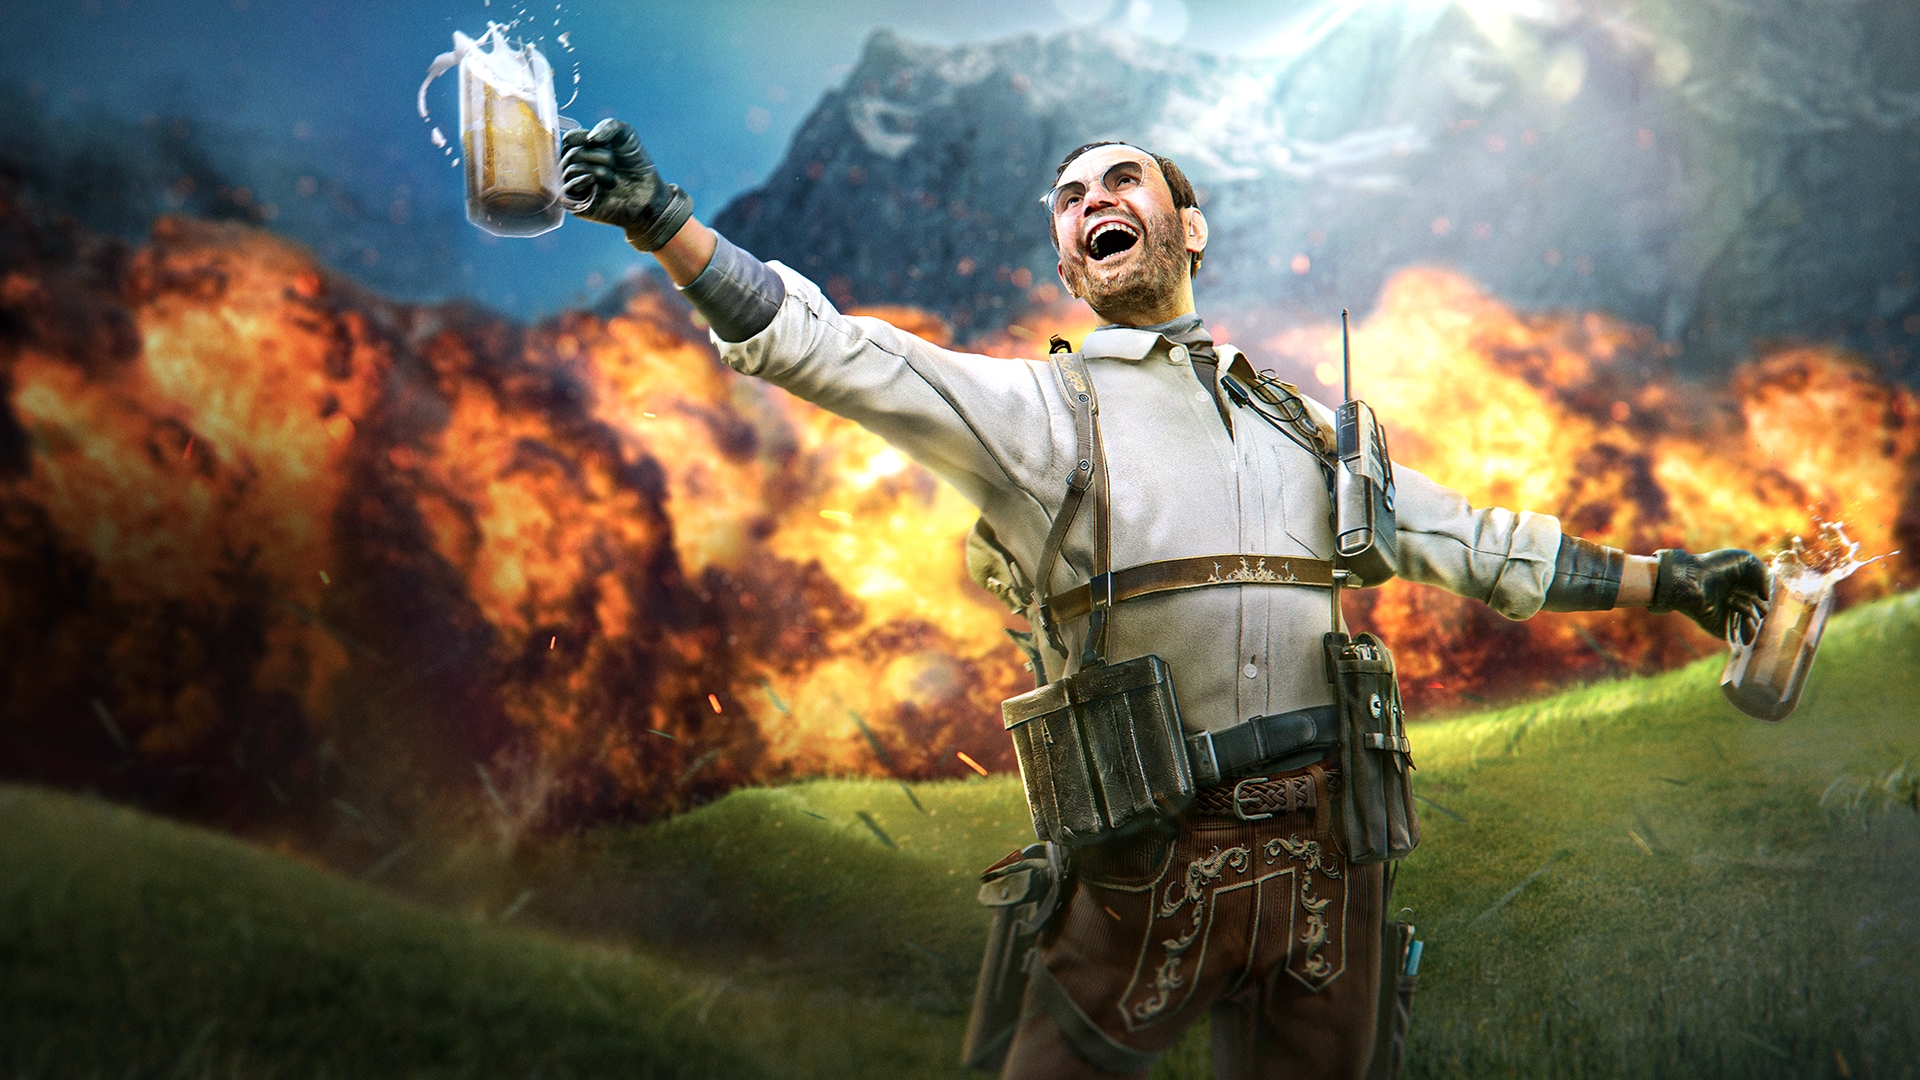 Pour up with the Tracer Pack: Oktoberfest Bundle